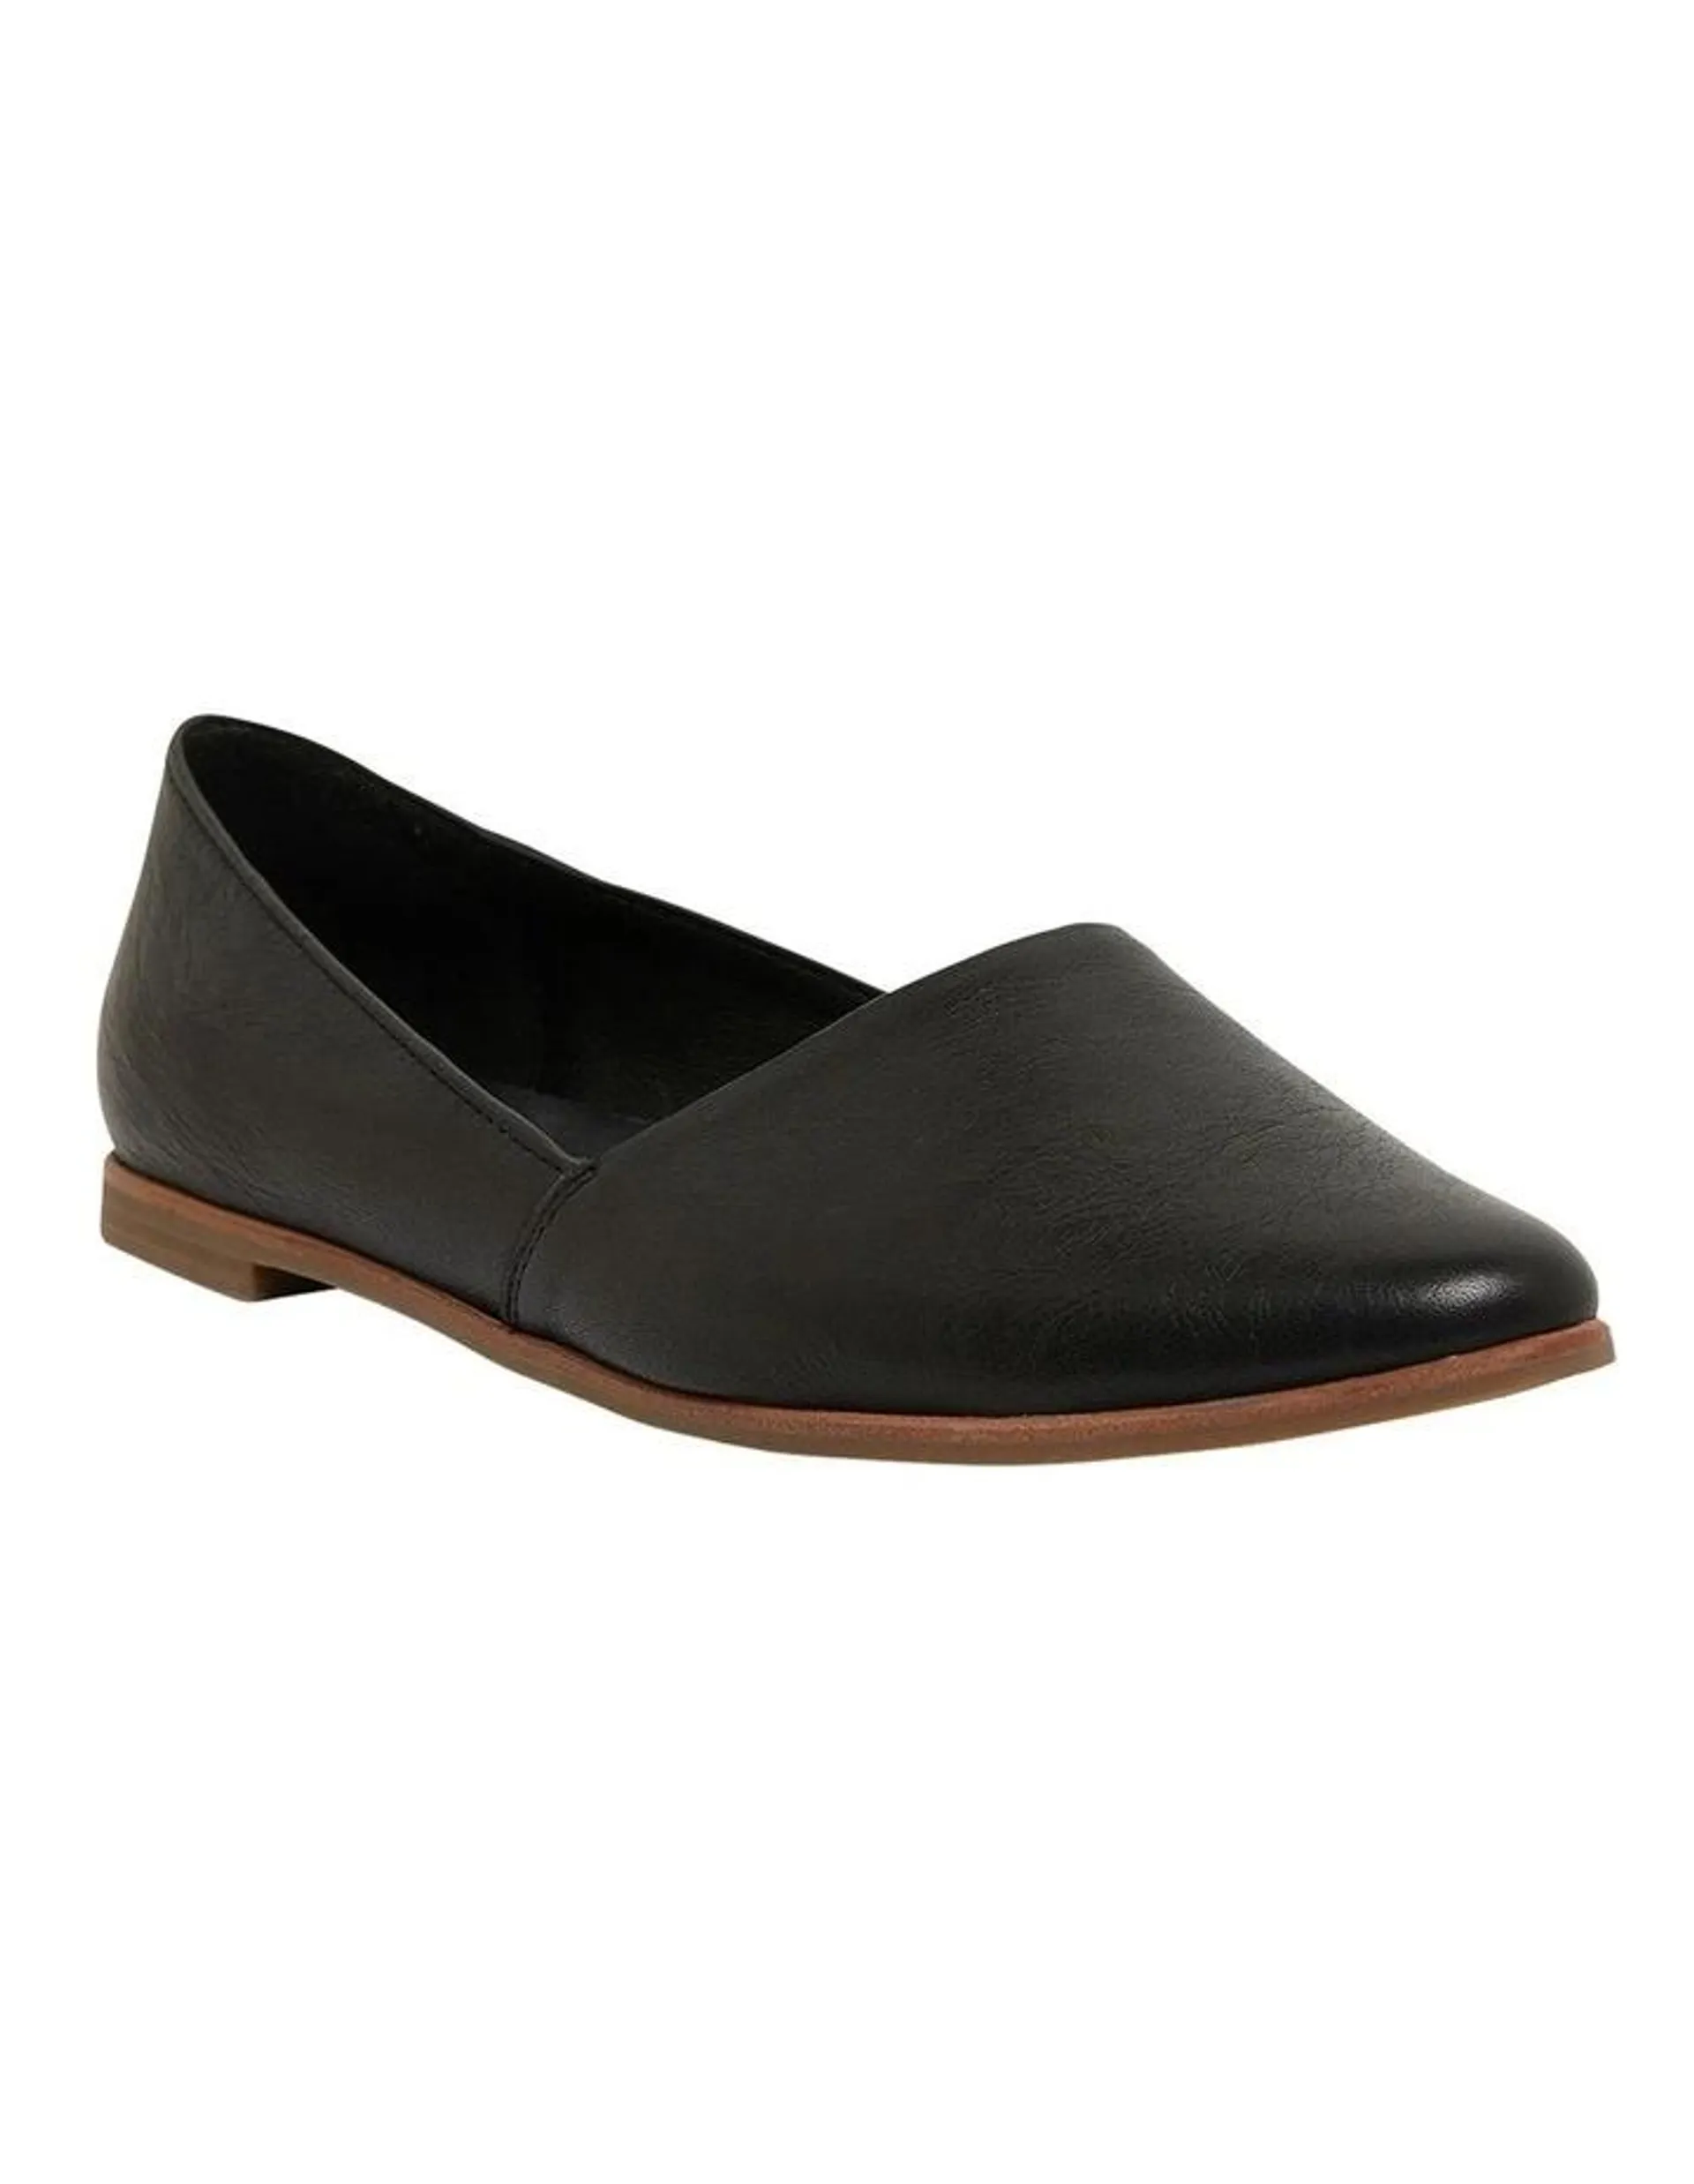 Rachael Flat Shoes in Black Leather